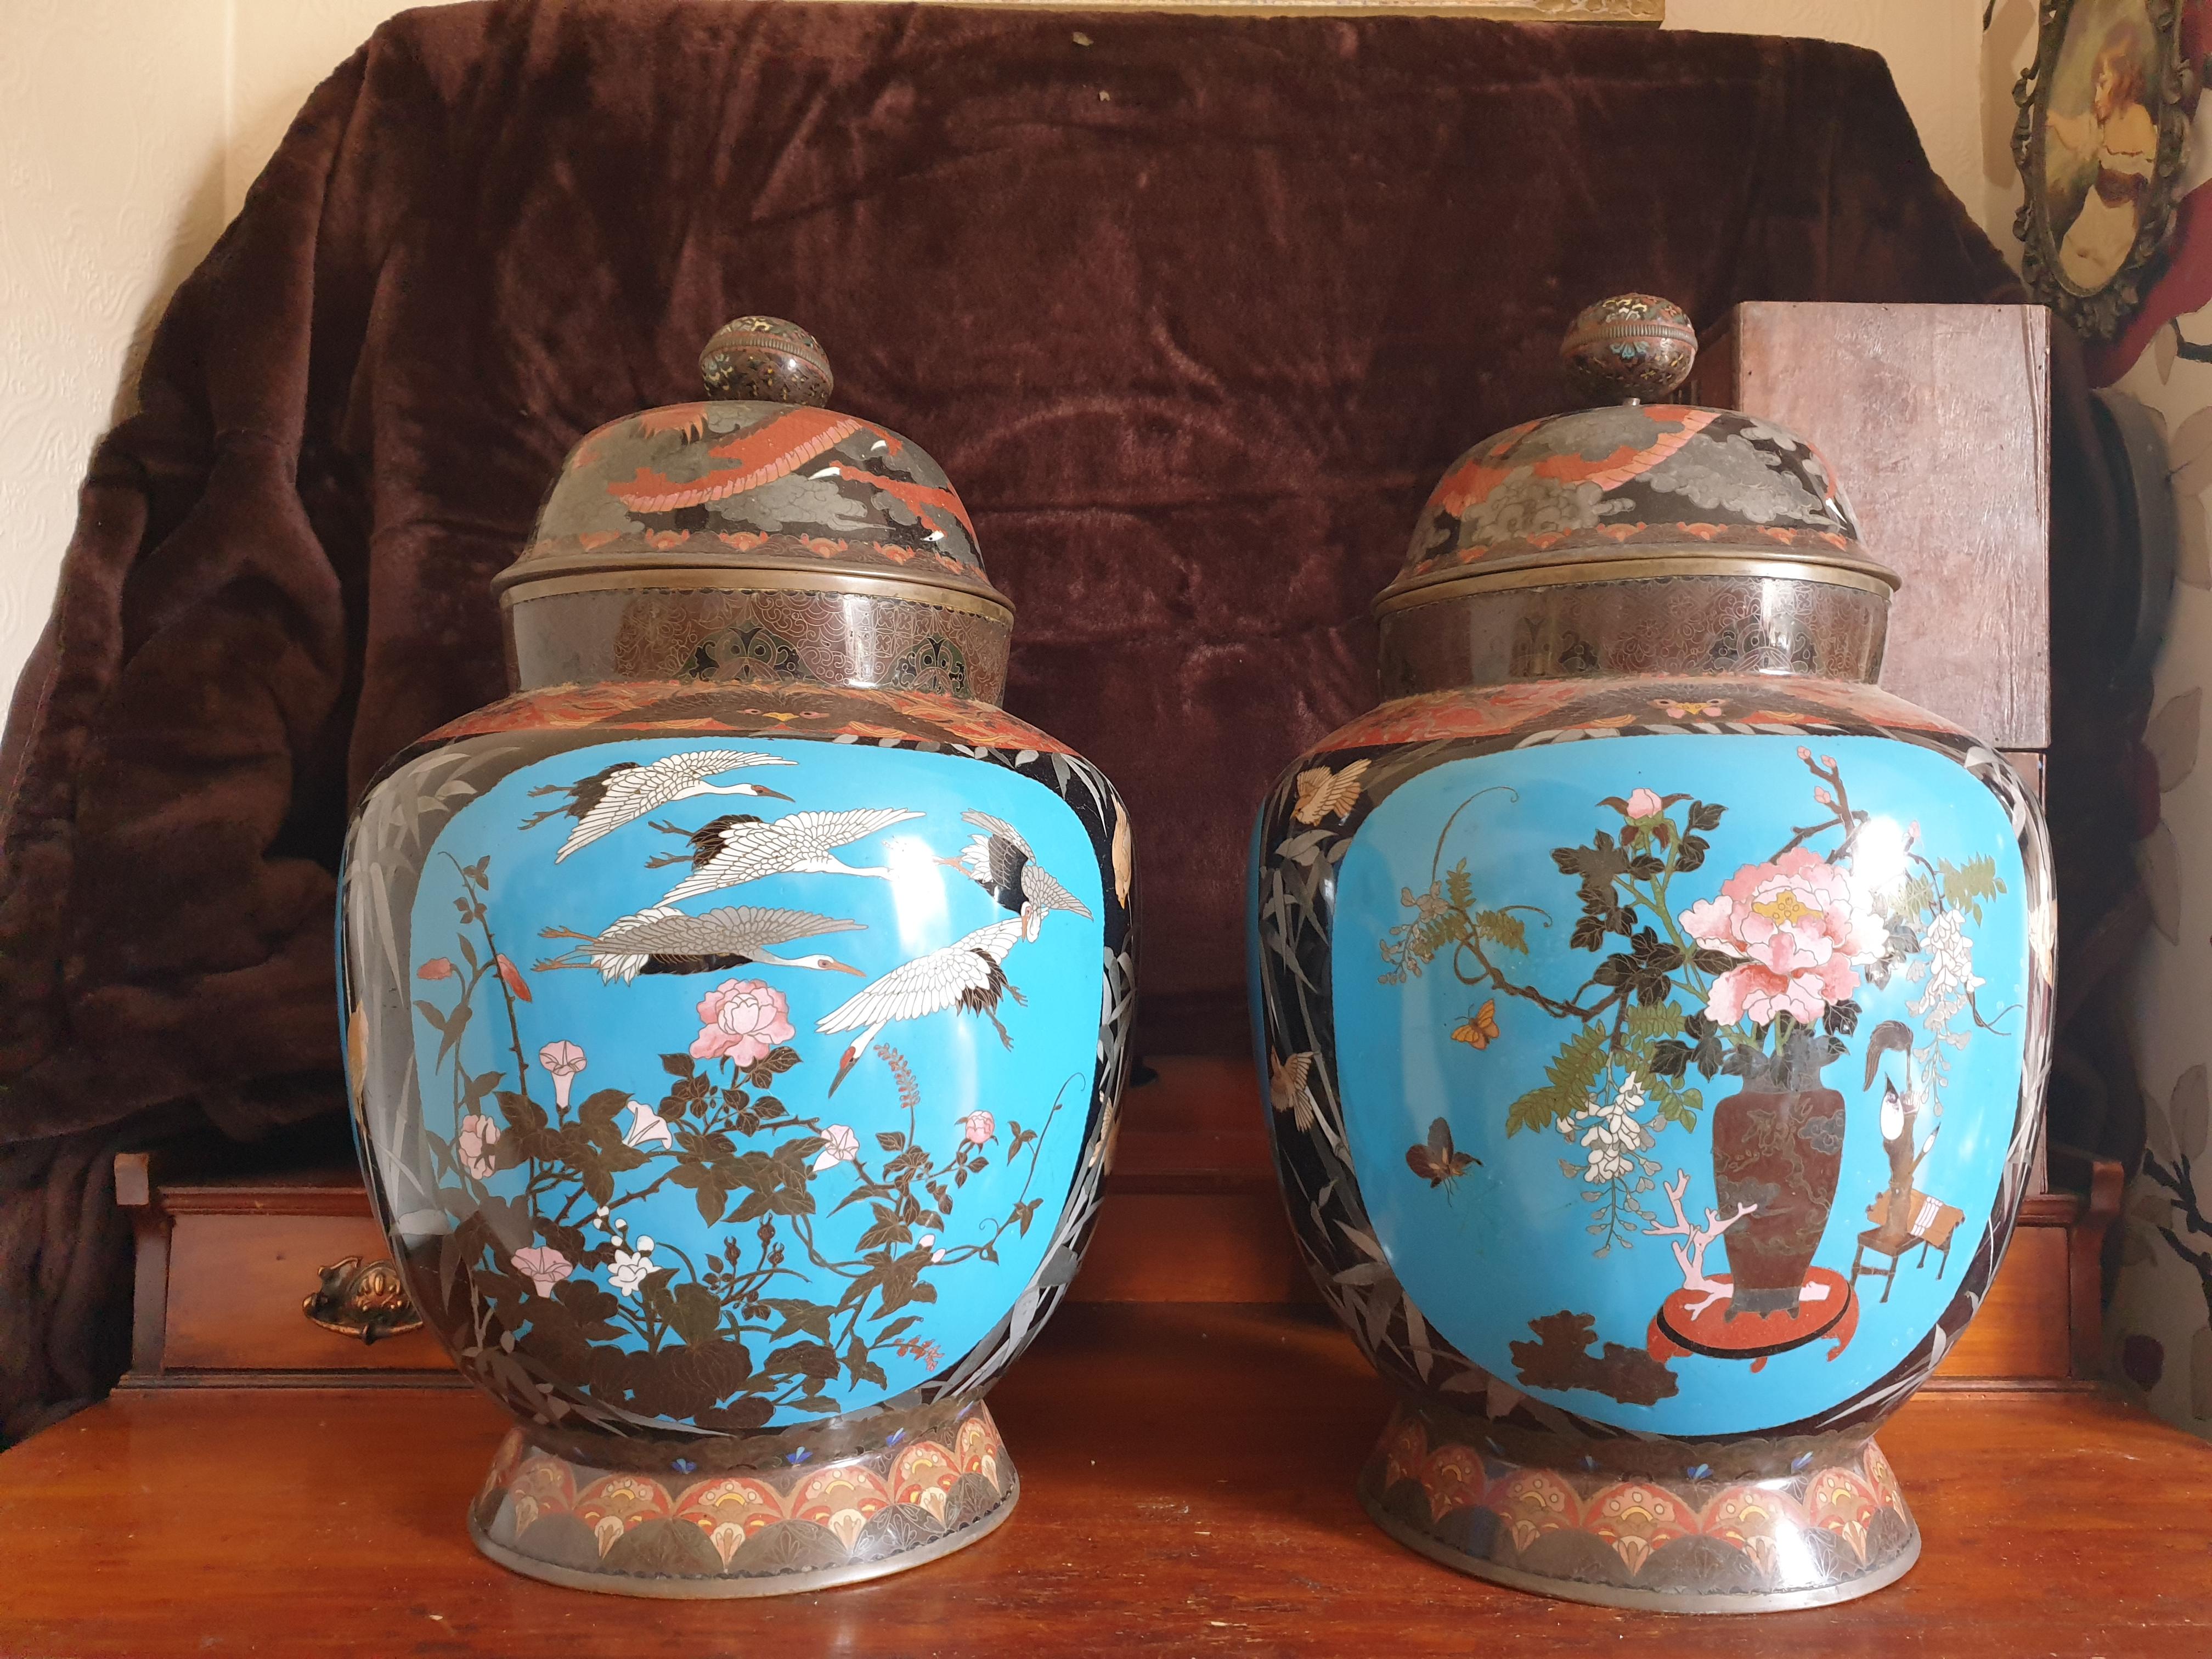 A magnificent large pair of Japanese Cloisonné hand painted vases.  These decorative vases dates back to early 19th century.  Heavily decorated with highly desired scenes of cranes, bamboo patterns and additional scenes of nature on a light blue